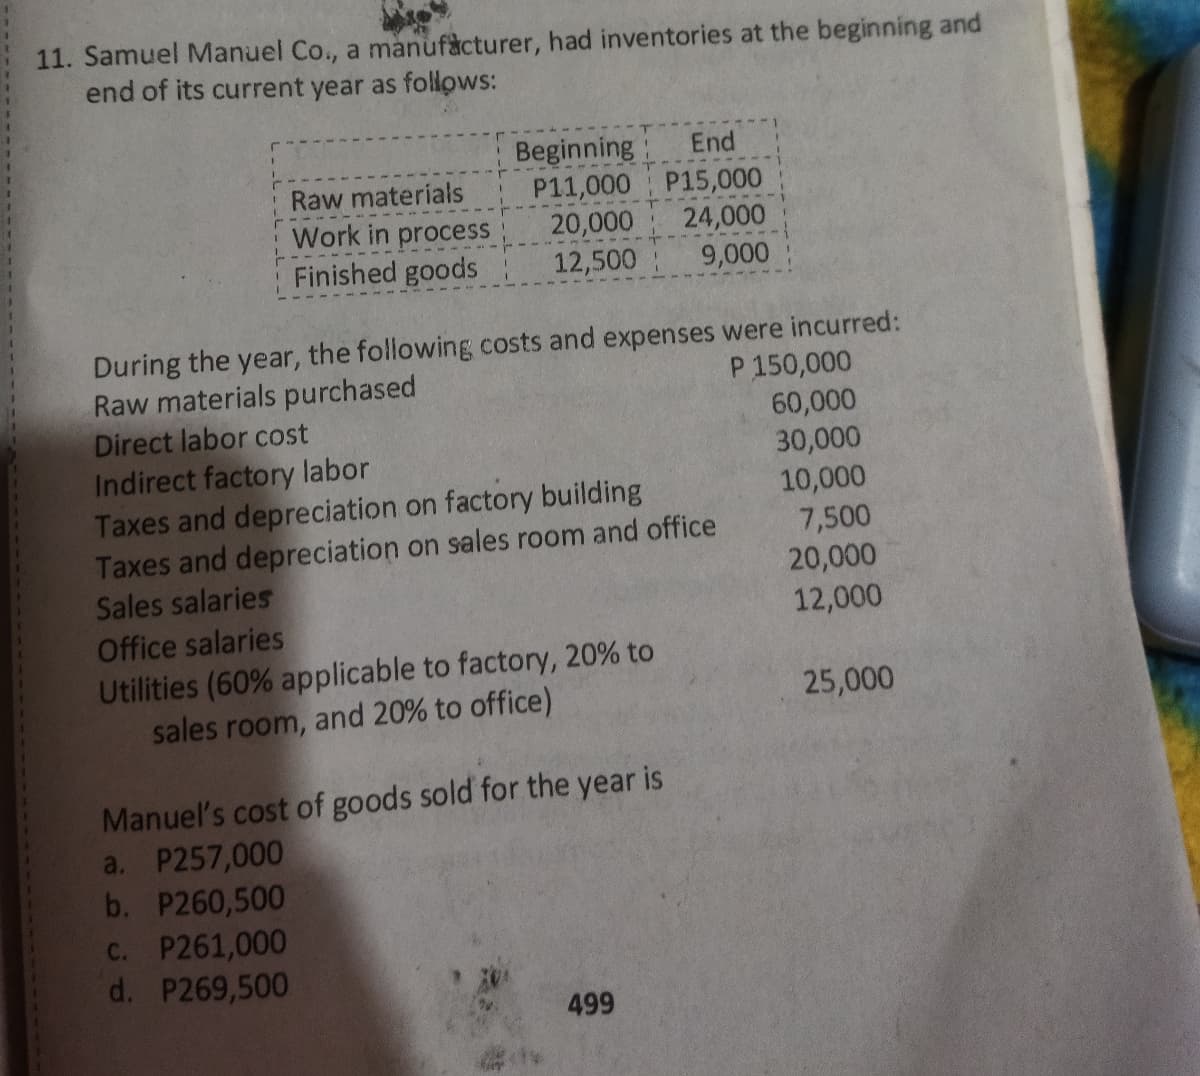 11. Samuel Manuel Co., a manufacturer, had inventories at the beginning and
end of its current year as follows:
Beginning
P11,000 P15,000
20,000
End
Raw materials
Work in process
Finished goods
24,000
12,500
9,000
During the year, the following costs and expenses were incurred:
Raw materials purchased
Direct labor cost
Indirect factory labor
Taxes and depreciation on factory building
Taxes and depreciation on sales room and office
Sales salaries
P 150,000
60,000
30,000
10,000
7,500
20,000
12,000
Office salaries
Utilities (60% applicable to factory, 20% to
sales room, and 20% to office)
25,000
Manuel's cost of goods sold for the year is
a. P257,000
b. P260,500
C. P261,000
d. P269,500
499
